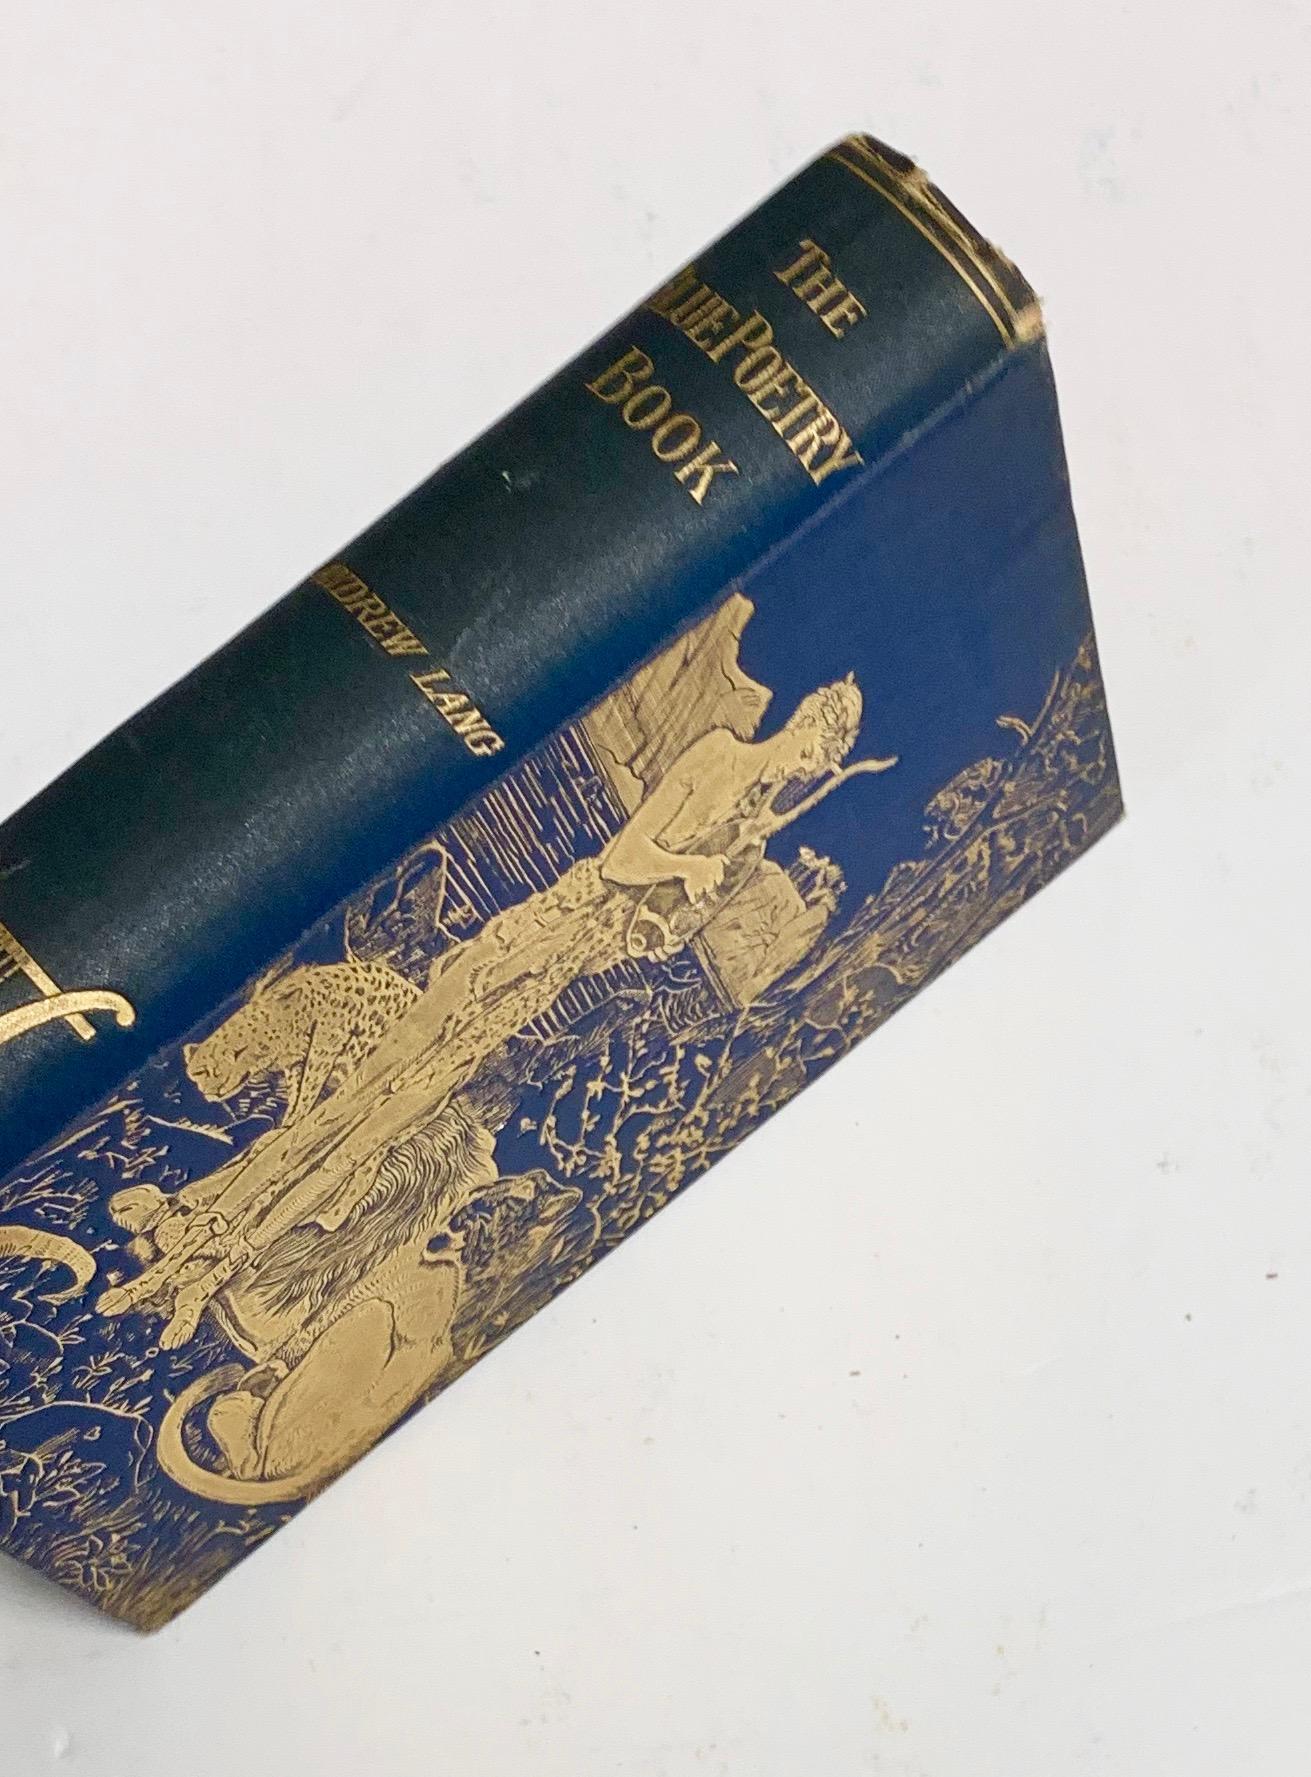 RAREST The Blue Poetry Book by Andrew Lang (1891)